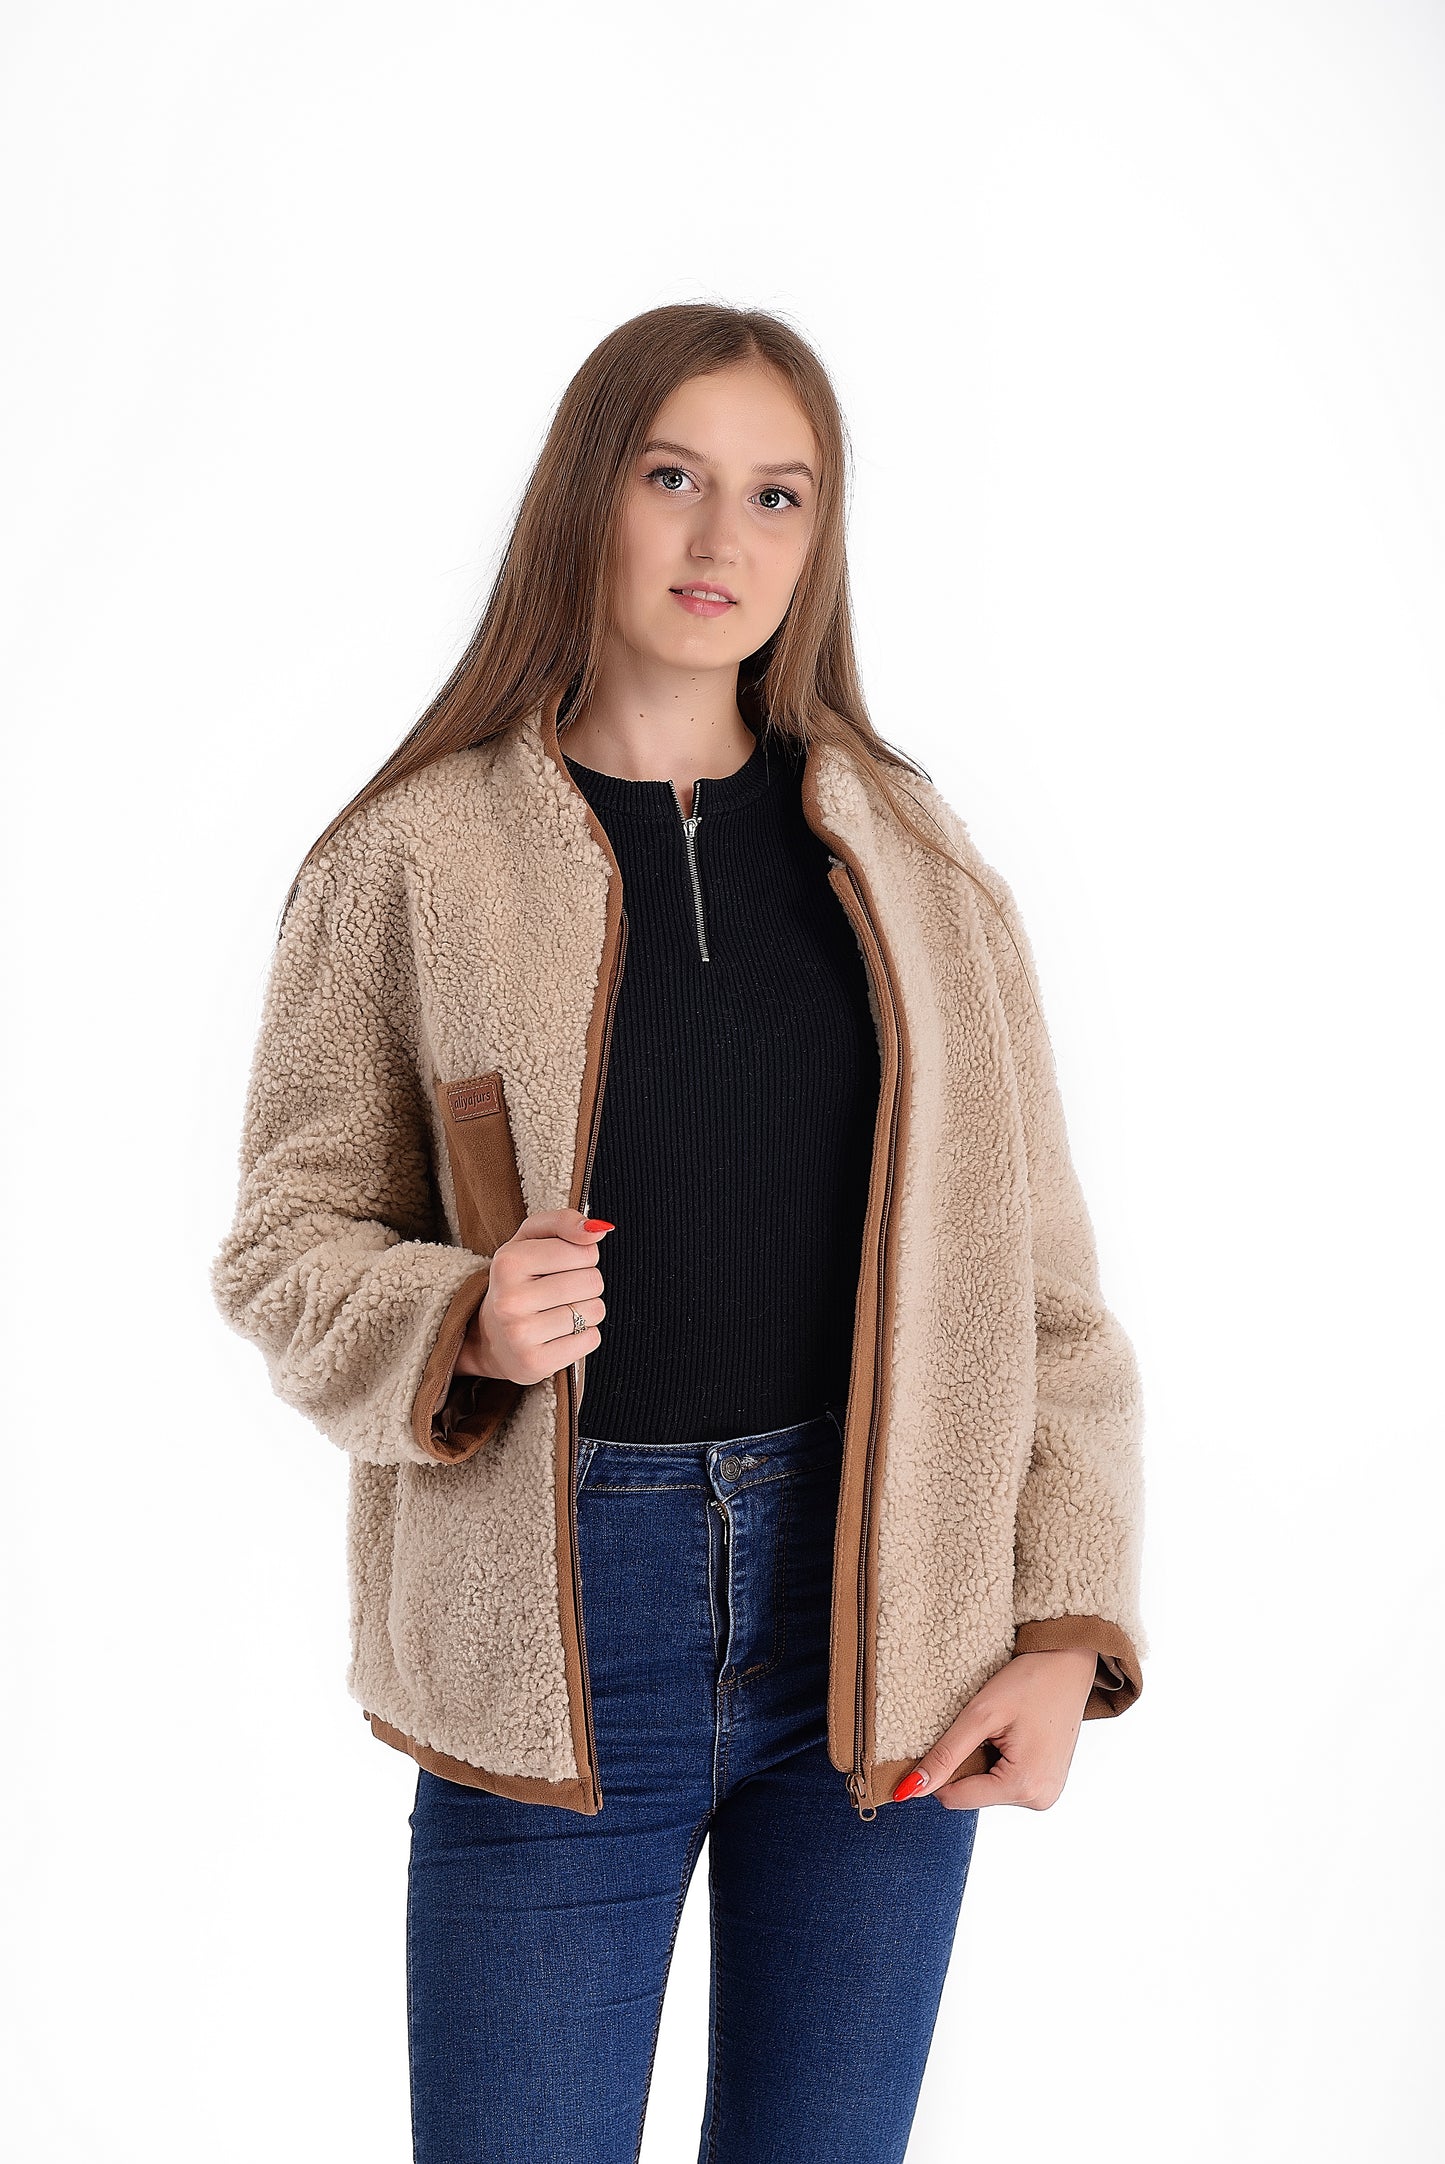 Lightweight Short Sheepskin Jacket in Beige Color with Boucle Sheepskin and Suede Leather Inserts